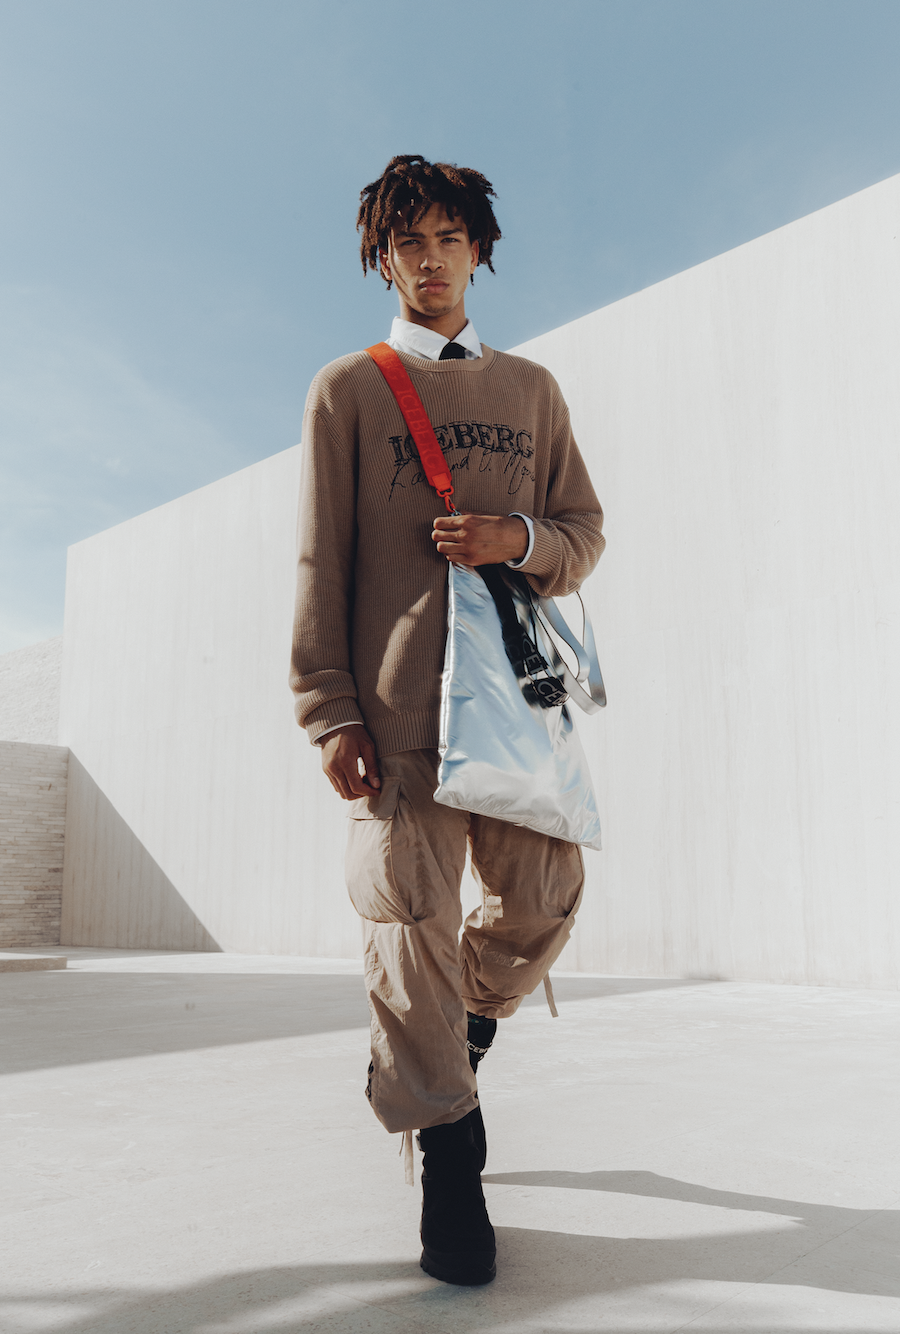 ICEBERG and Kailand O. Morris Collaborate on New Capsule Collection - V ...